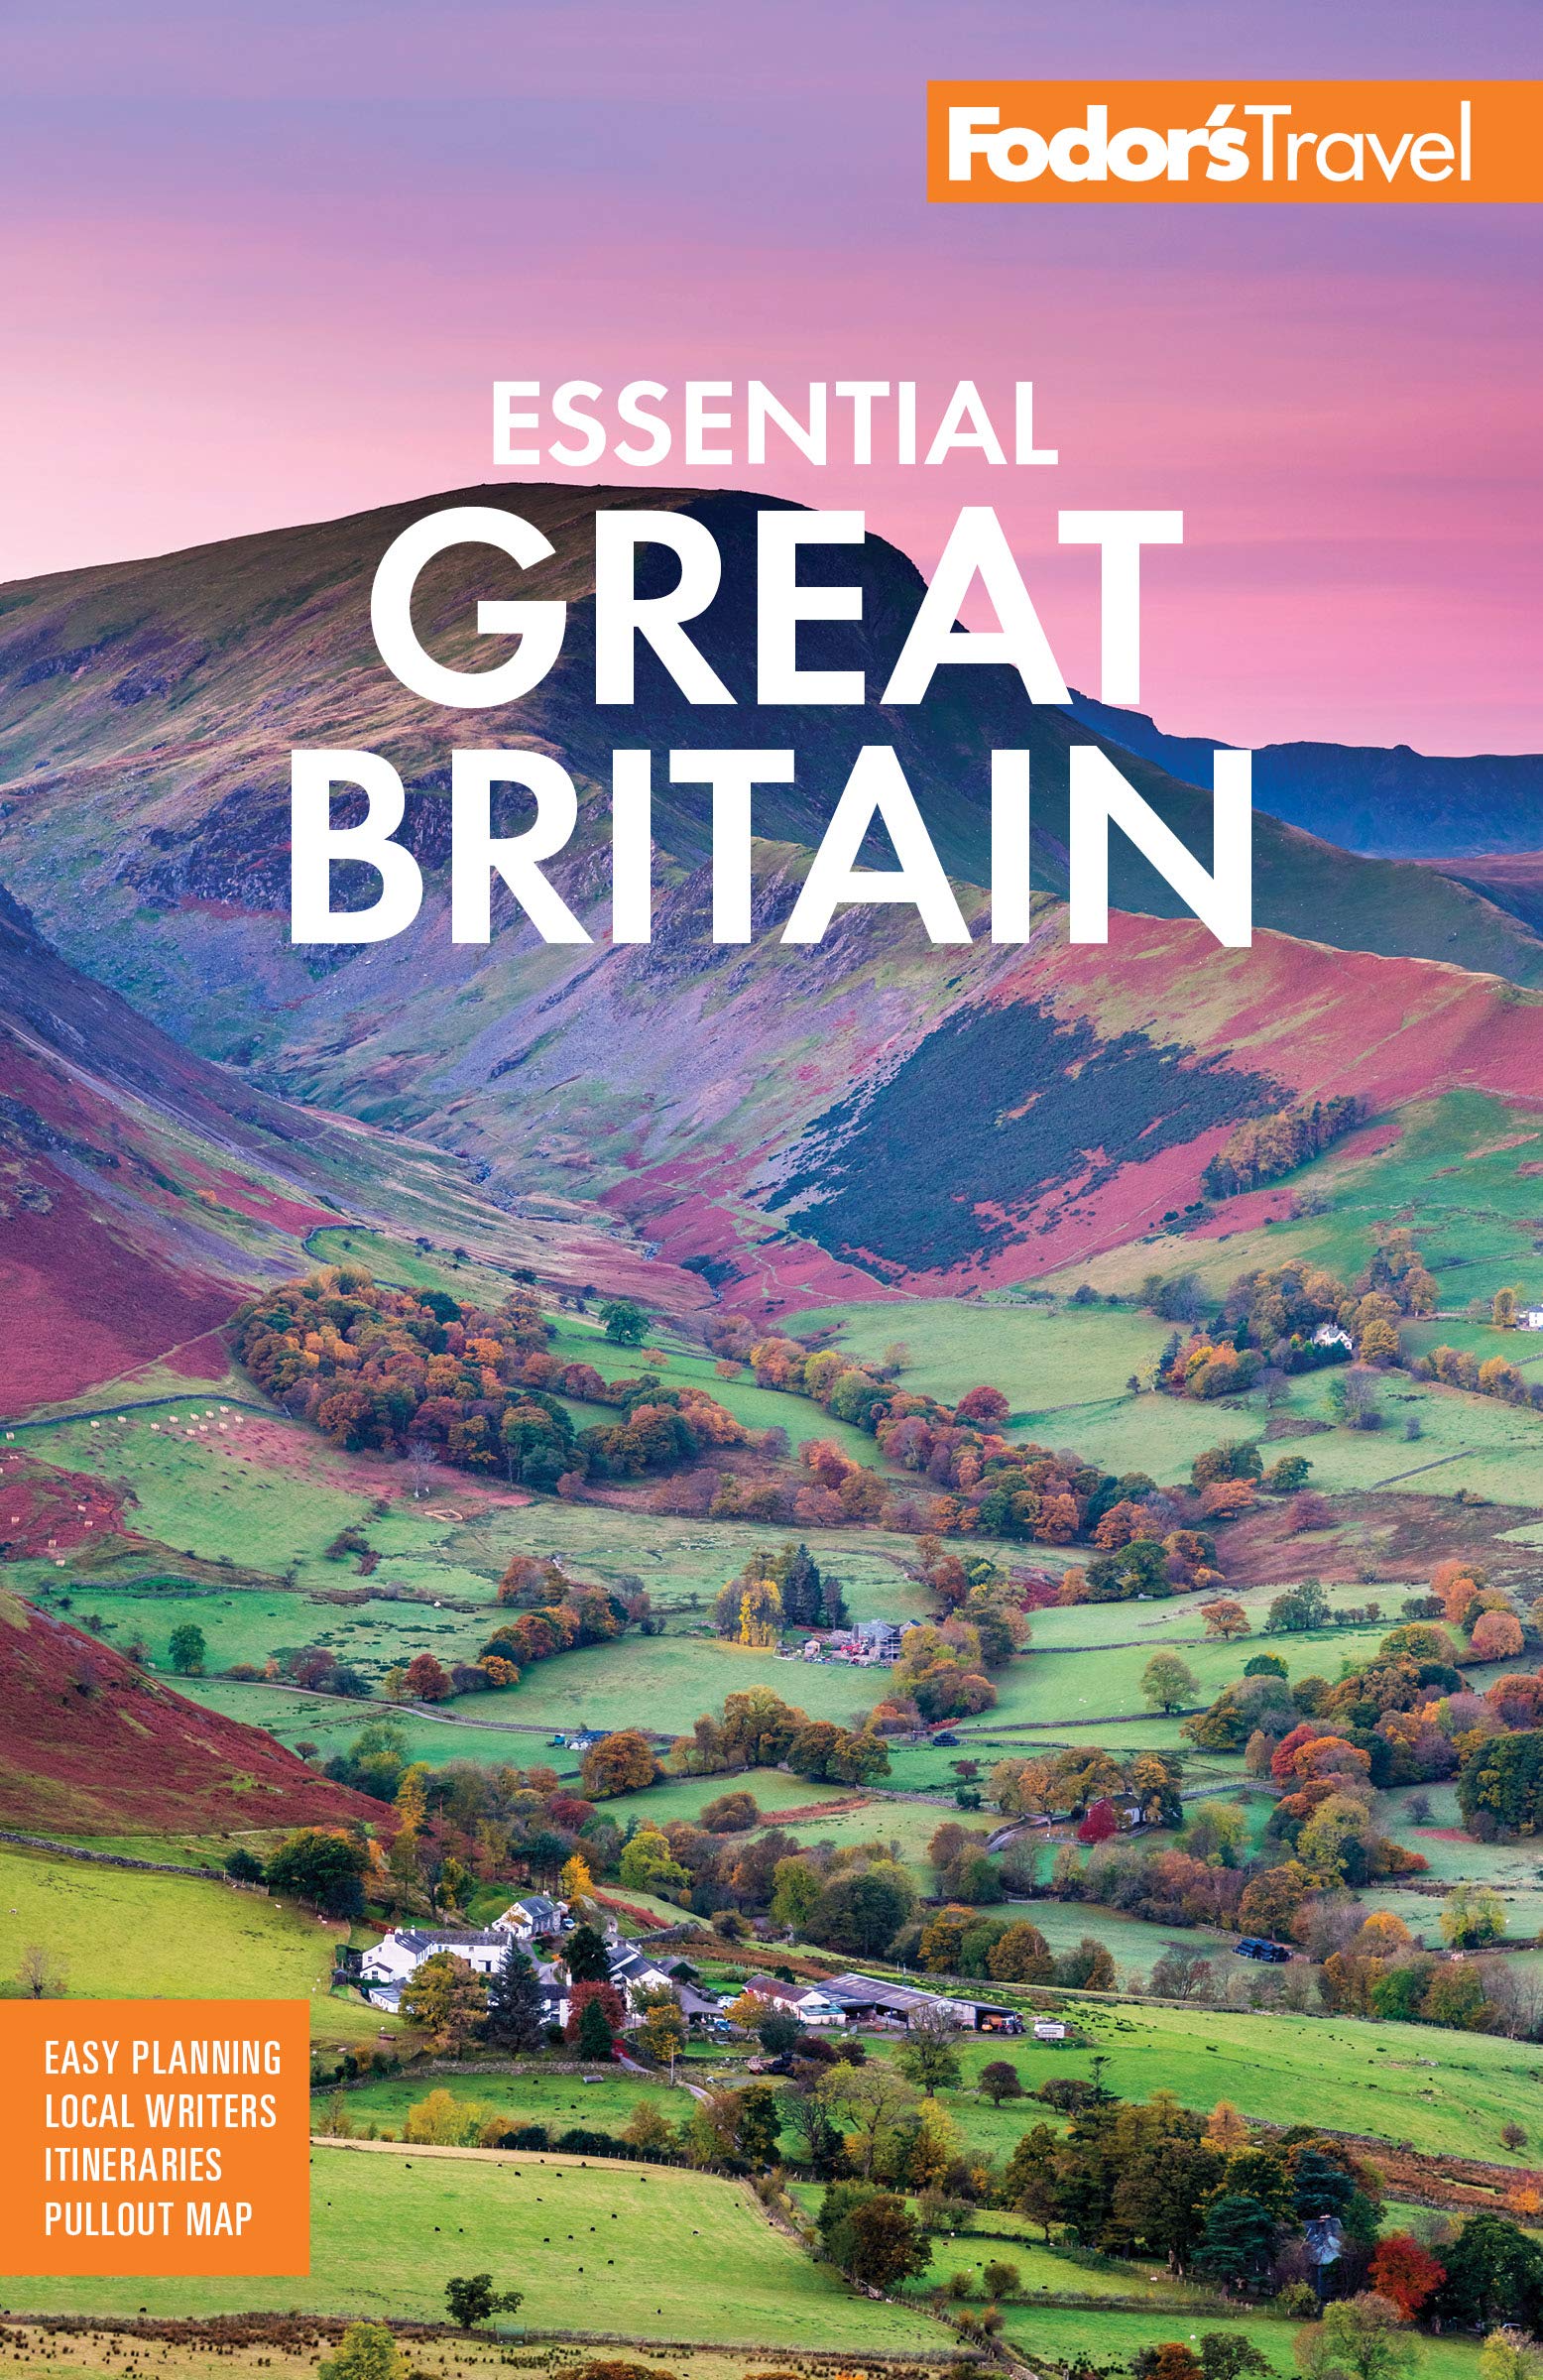 Fodor’s Essential Great Britain: with the Best of England, Scotland & Wales (Full-color Travel Guide)